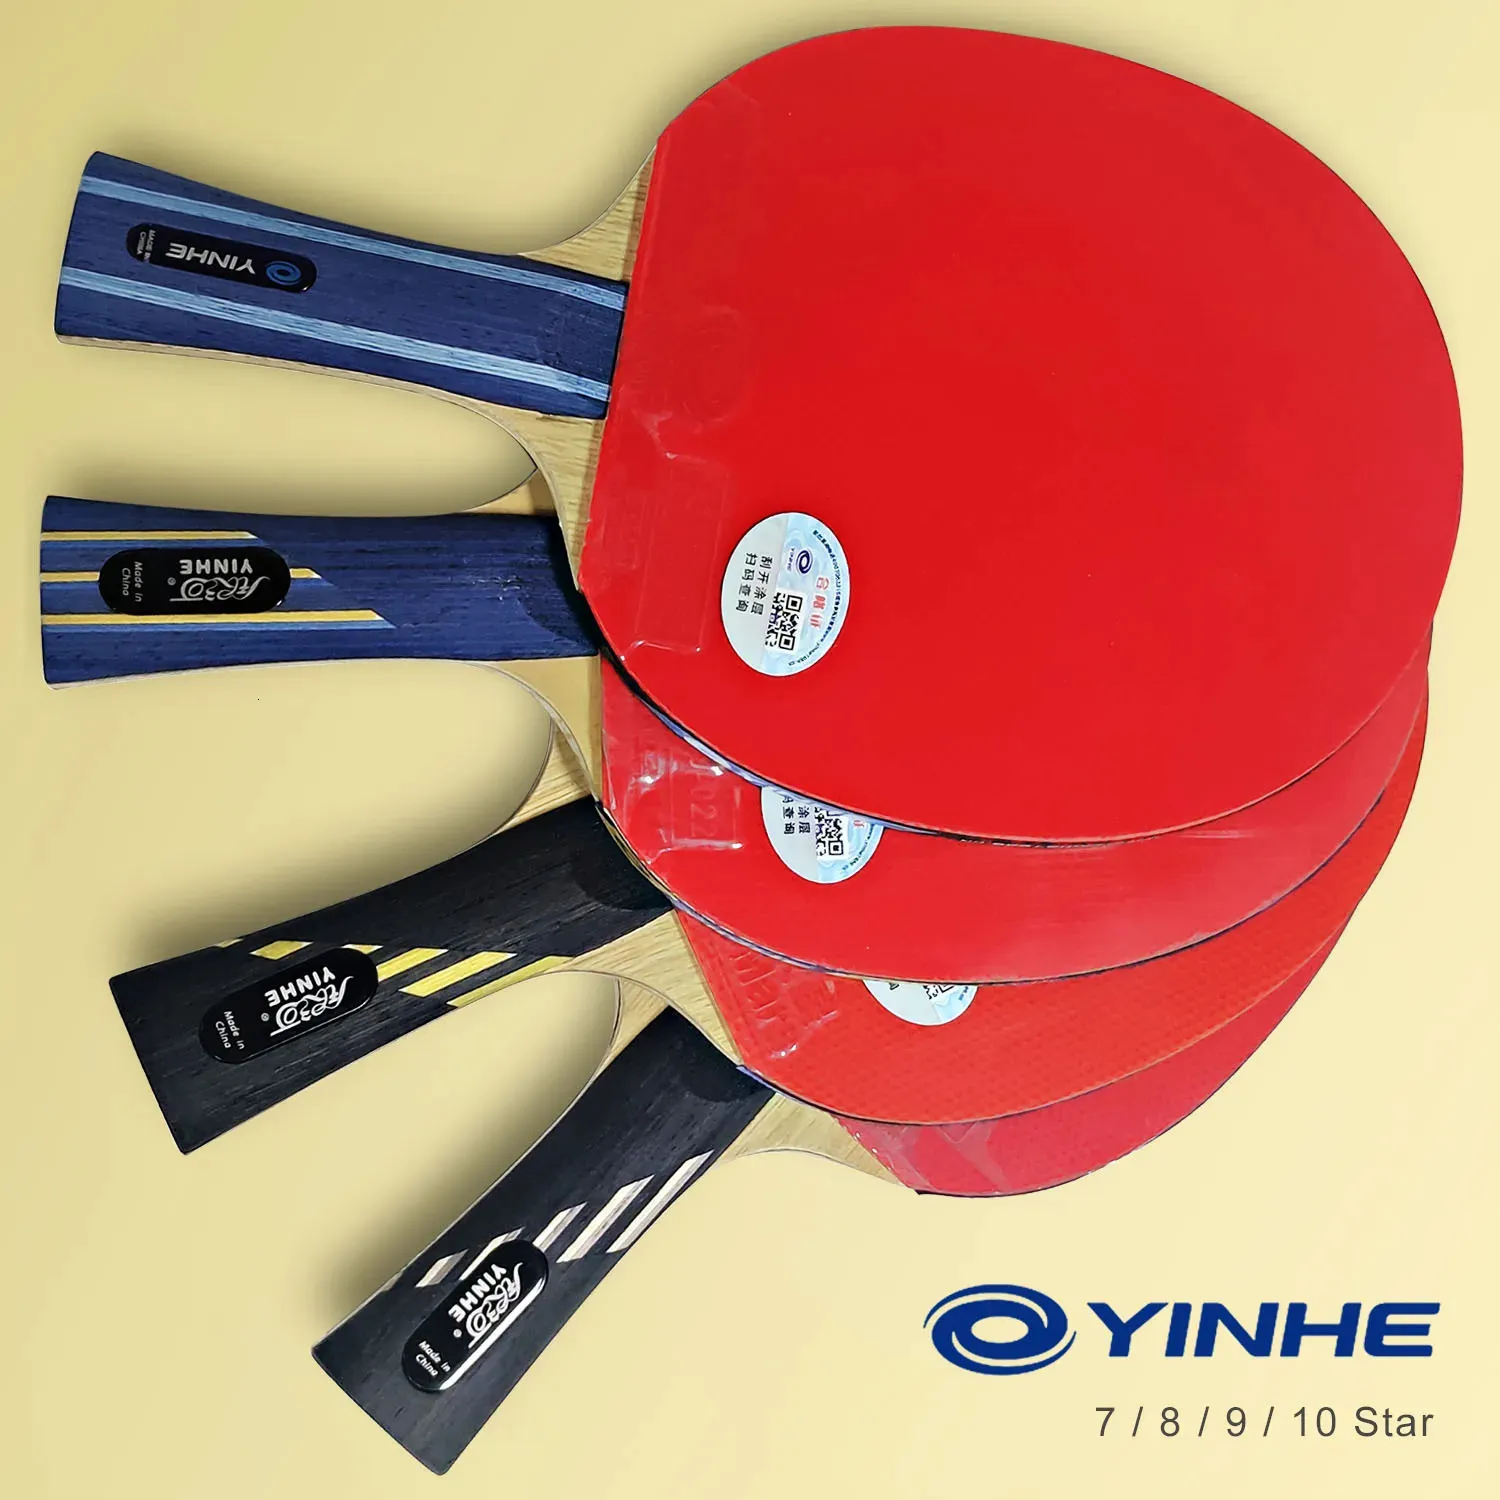 Yinhe Professional Table Tennis Racket 78910 Star Carbon Offence Ping Pong LightWeight Elastic with ITTF承認240419